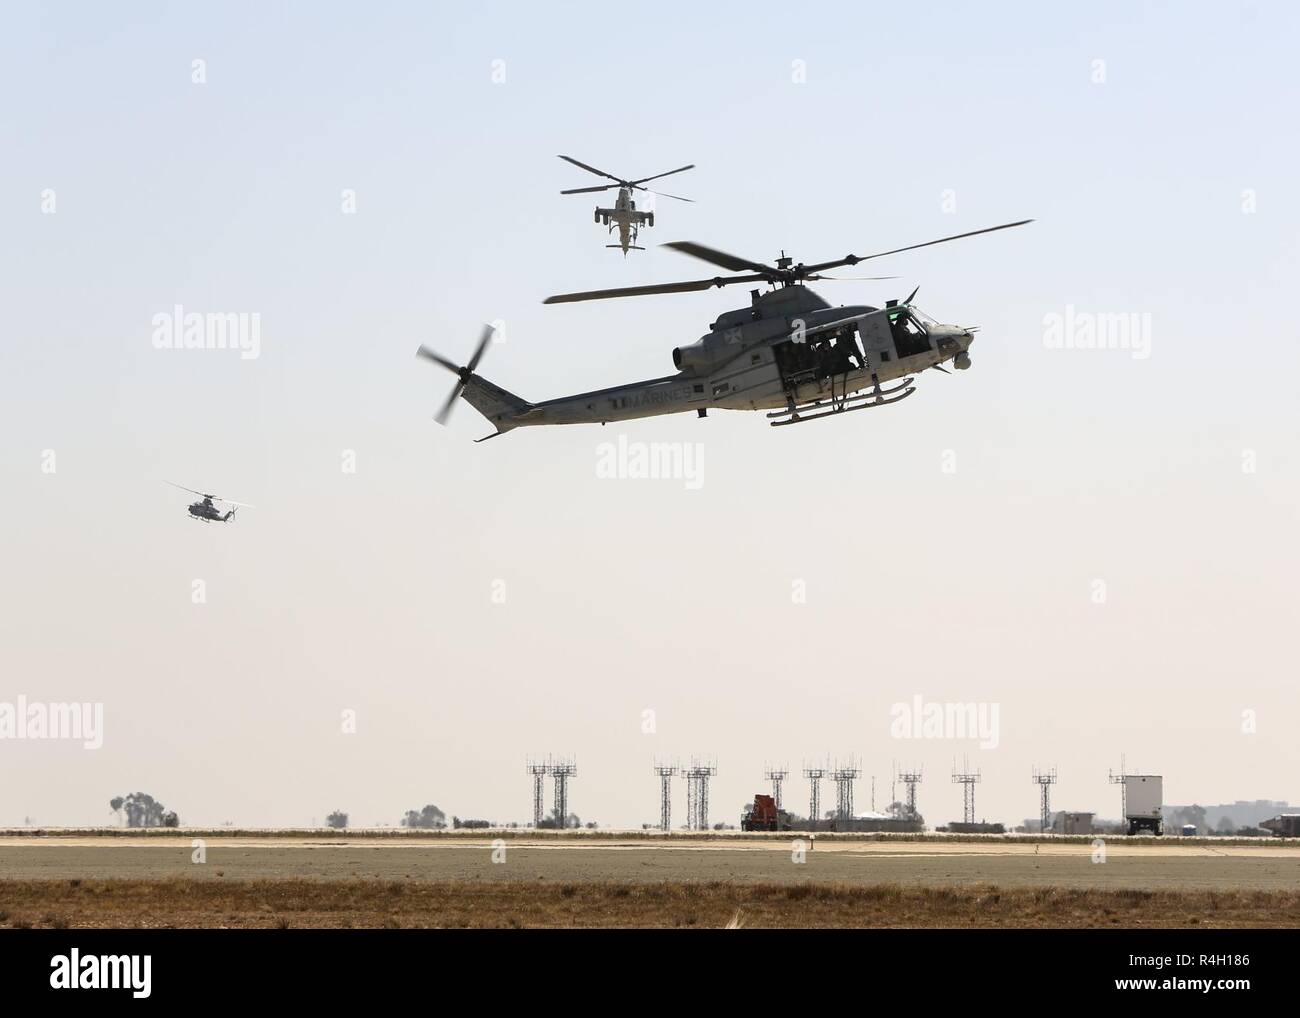 A UH-1Y Huey hovers over the flight line as two AH-1Z Vipers provide close air support during the Marine Air Ground Task Force demonstration at the 2018 Marine Corps Air Station Miramar Air Show on MCAS Miramar, Calif., Sept. 28. This years air show honors '100 years of women in the Marine Corps' by featuring several performances and displays that highlight the accomplishments and milestones women have made since the first female enlistee, Olpha May Johnson, who joined the service in 1918. Stock Photo